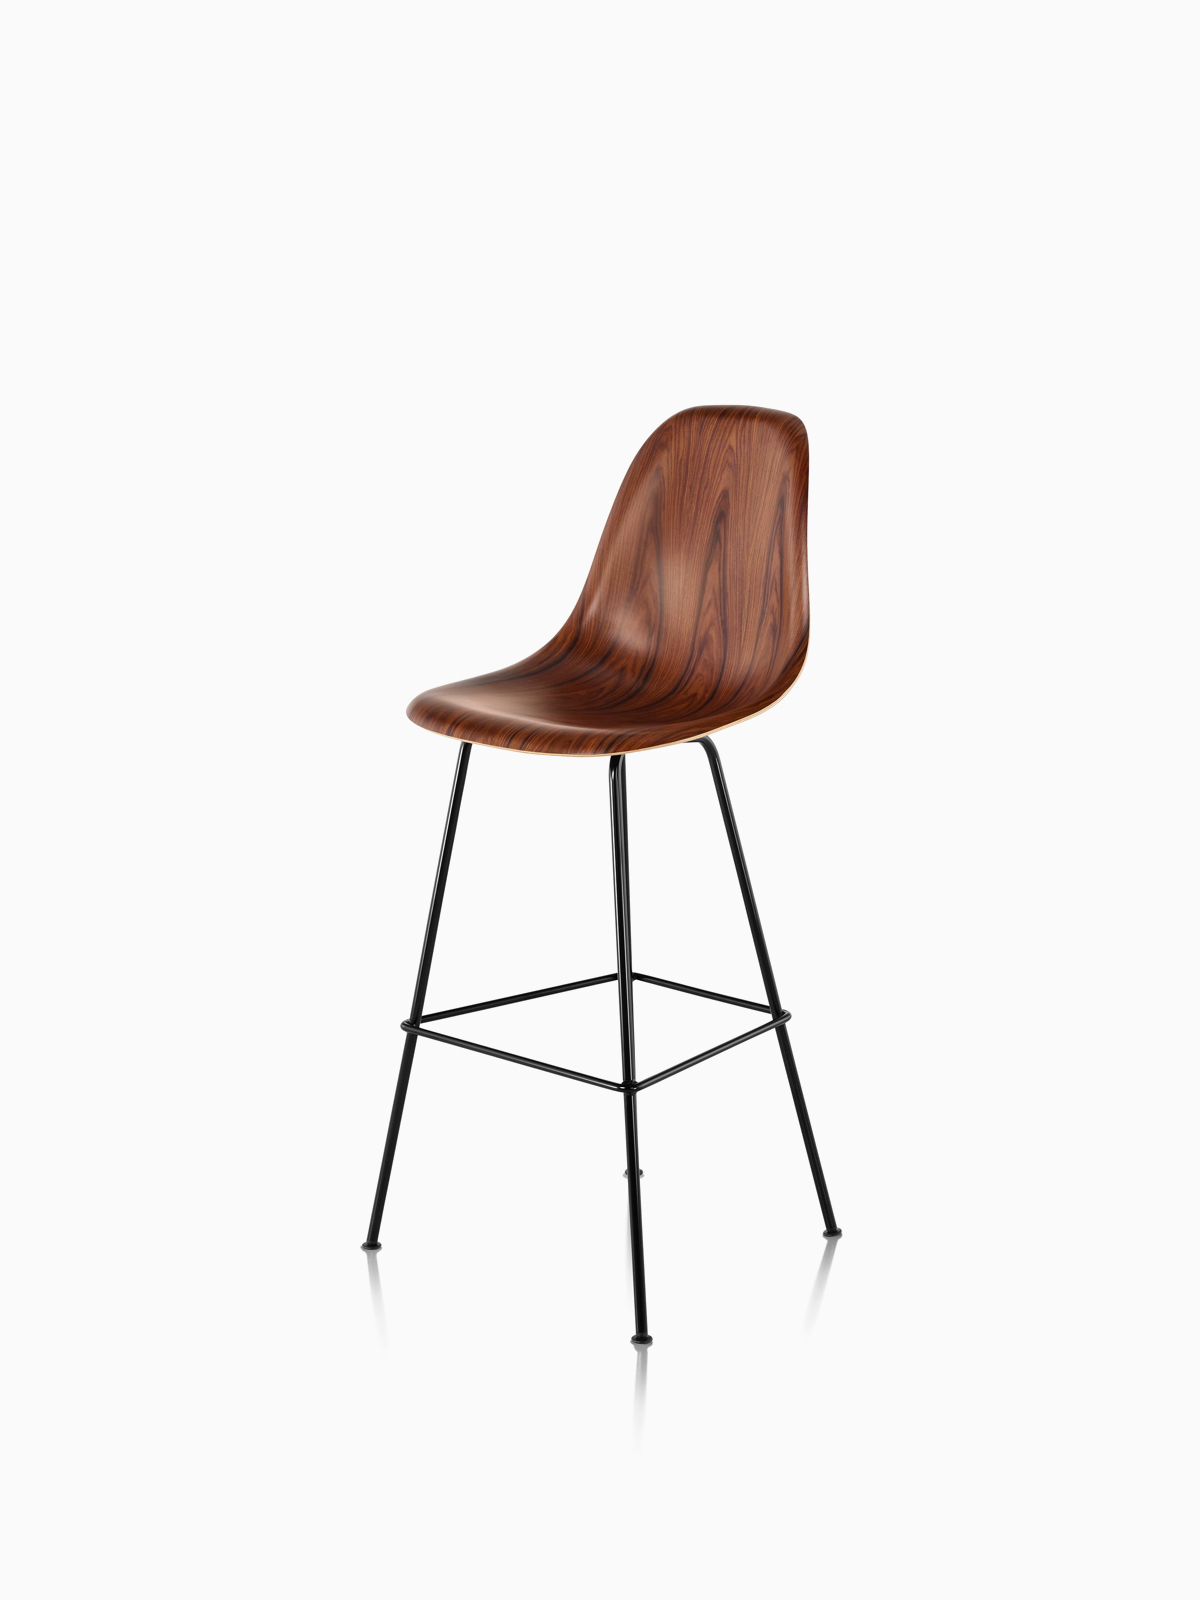 Eames Moulded Wood Stool